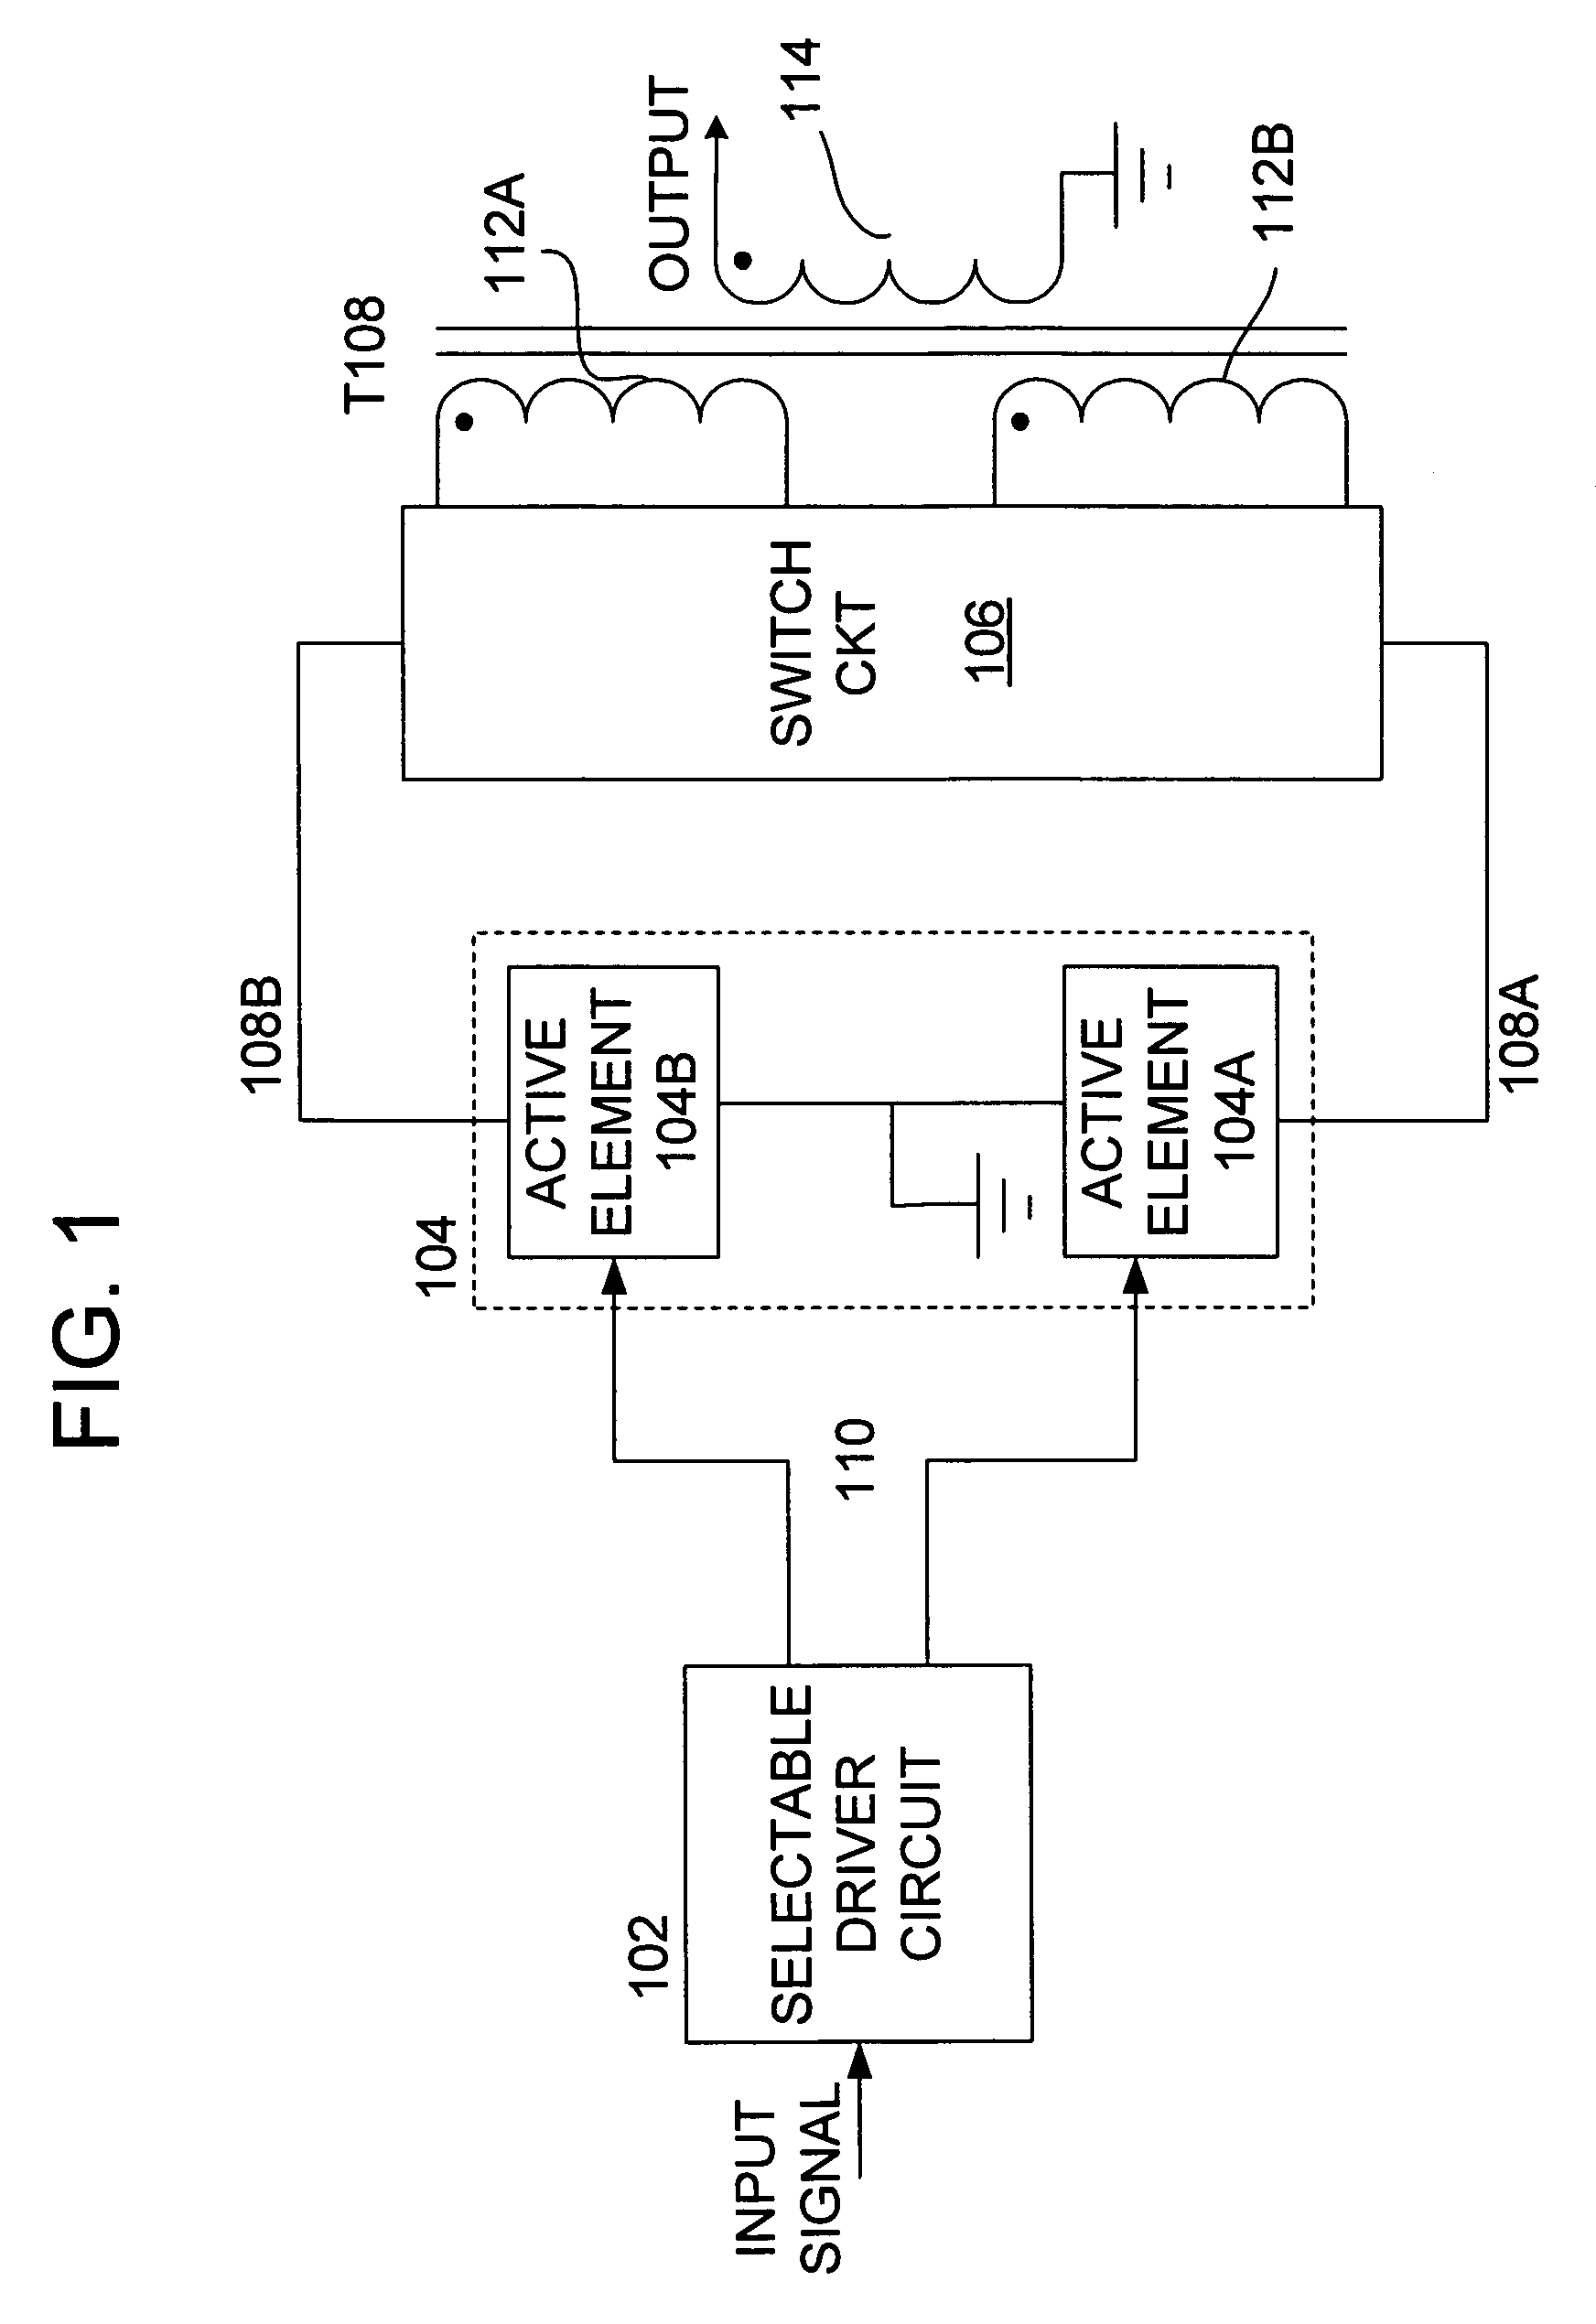 Methods and apparatus for switching between class A and A/B operation in a power amplifier